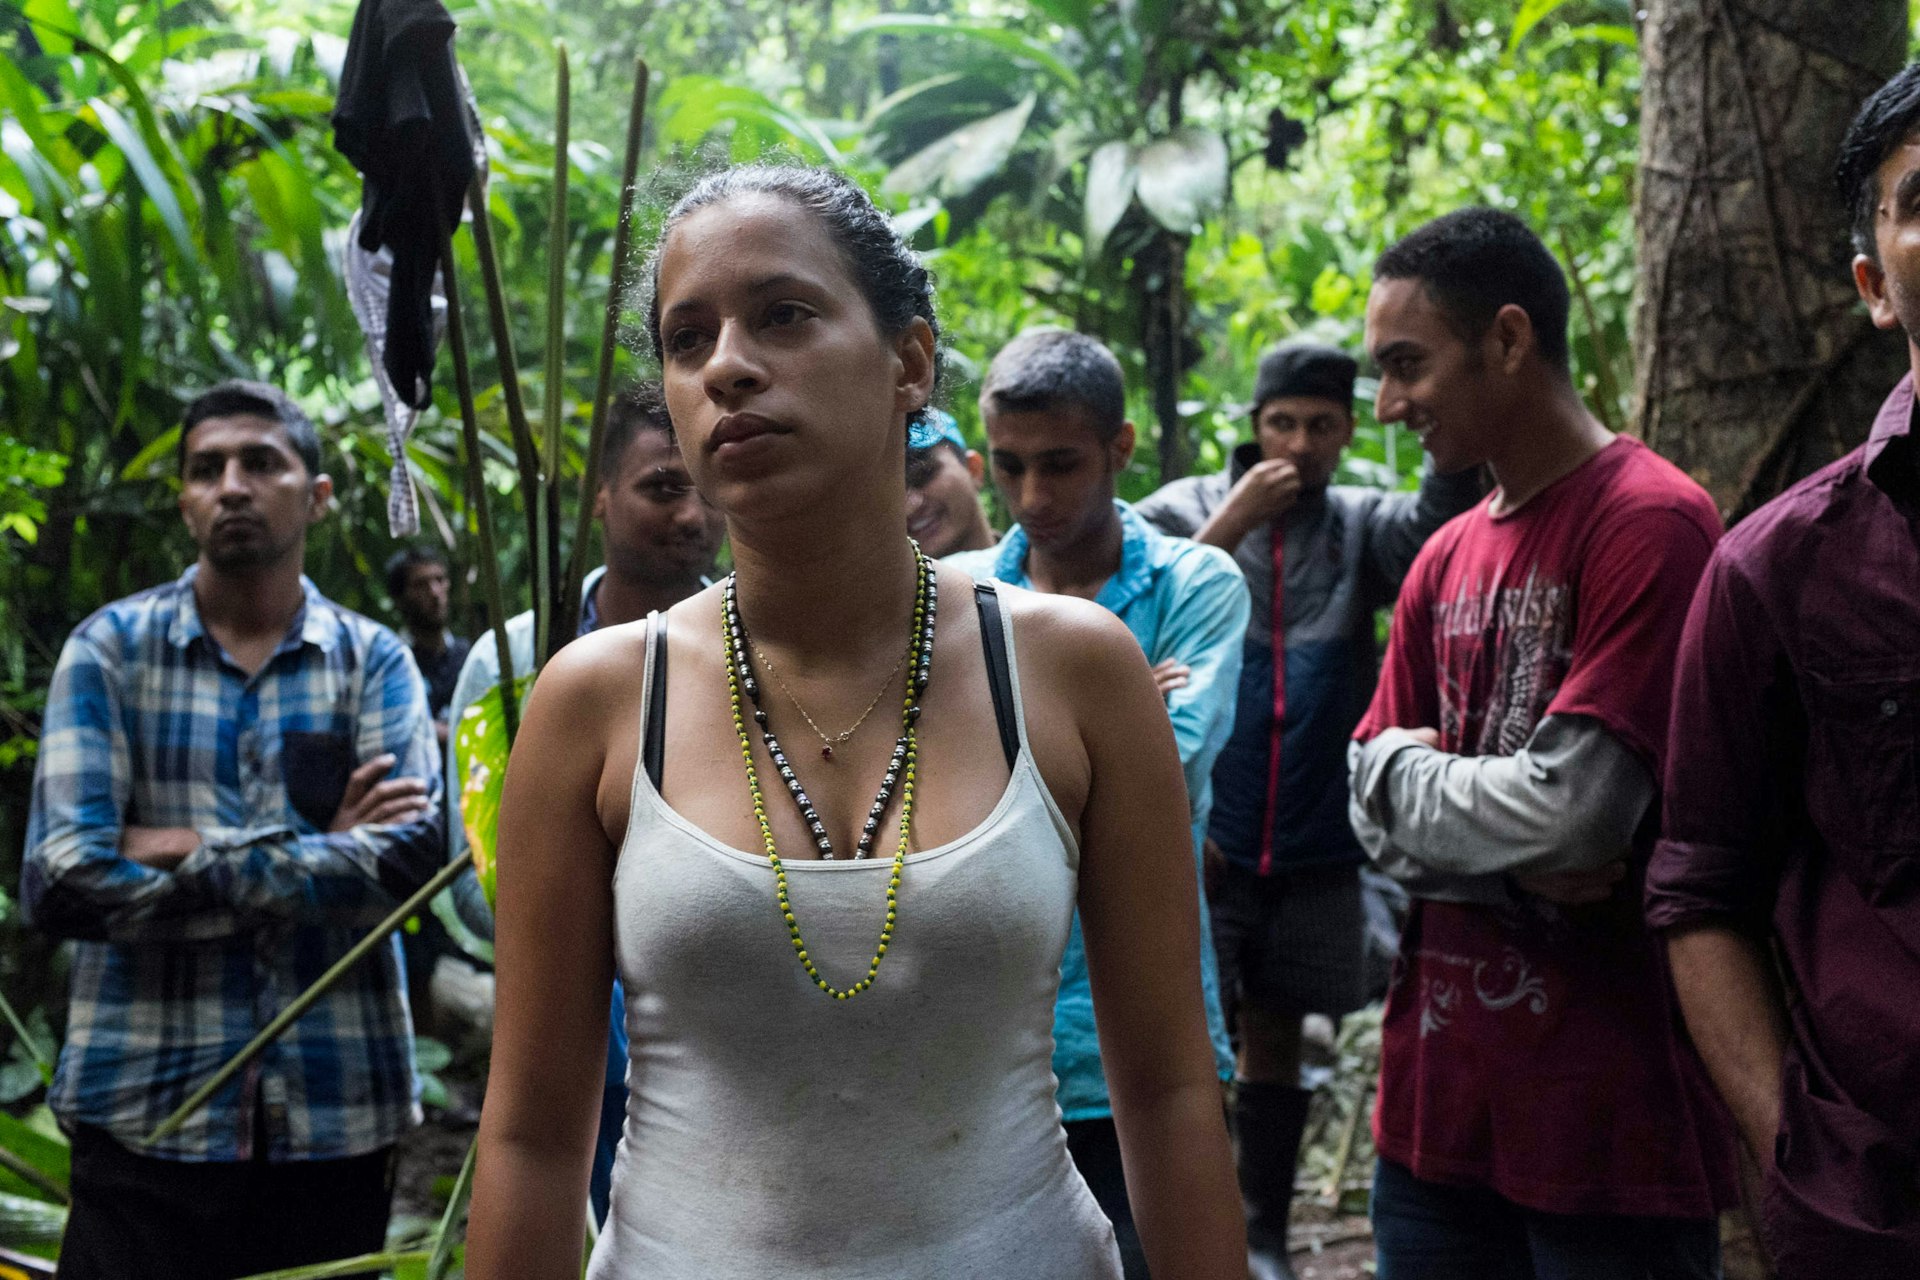 Liset at dawn in the Darien Gap, she and Marta are the only women among a group of almost 50 migrants and smugglers.